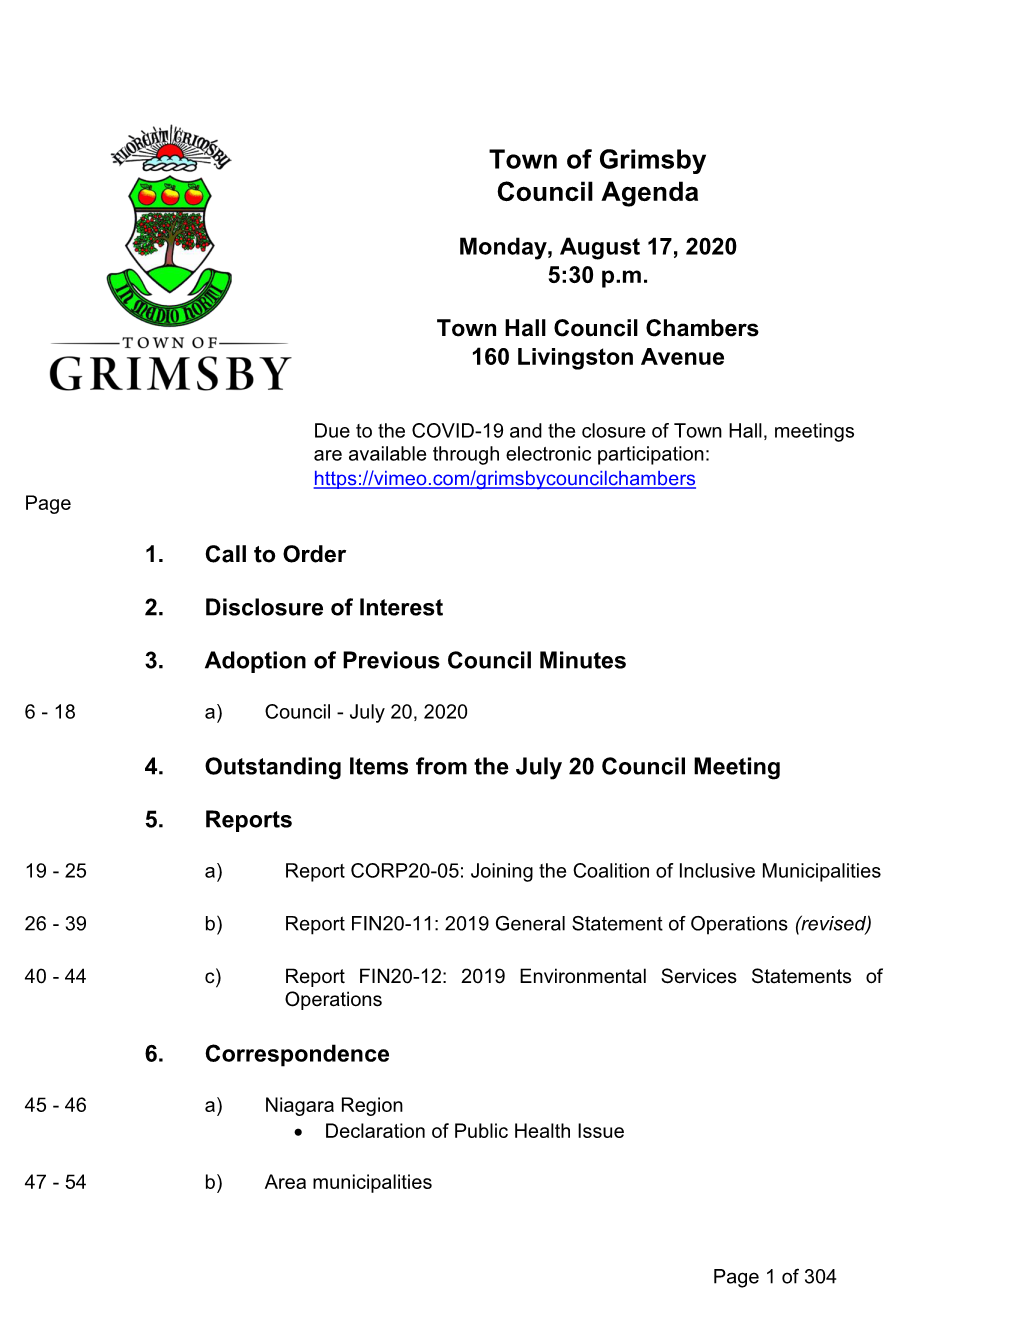 Town of Grimsby Council Agenda